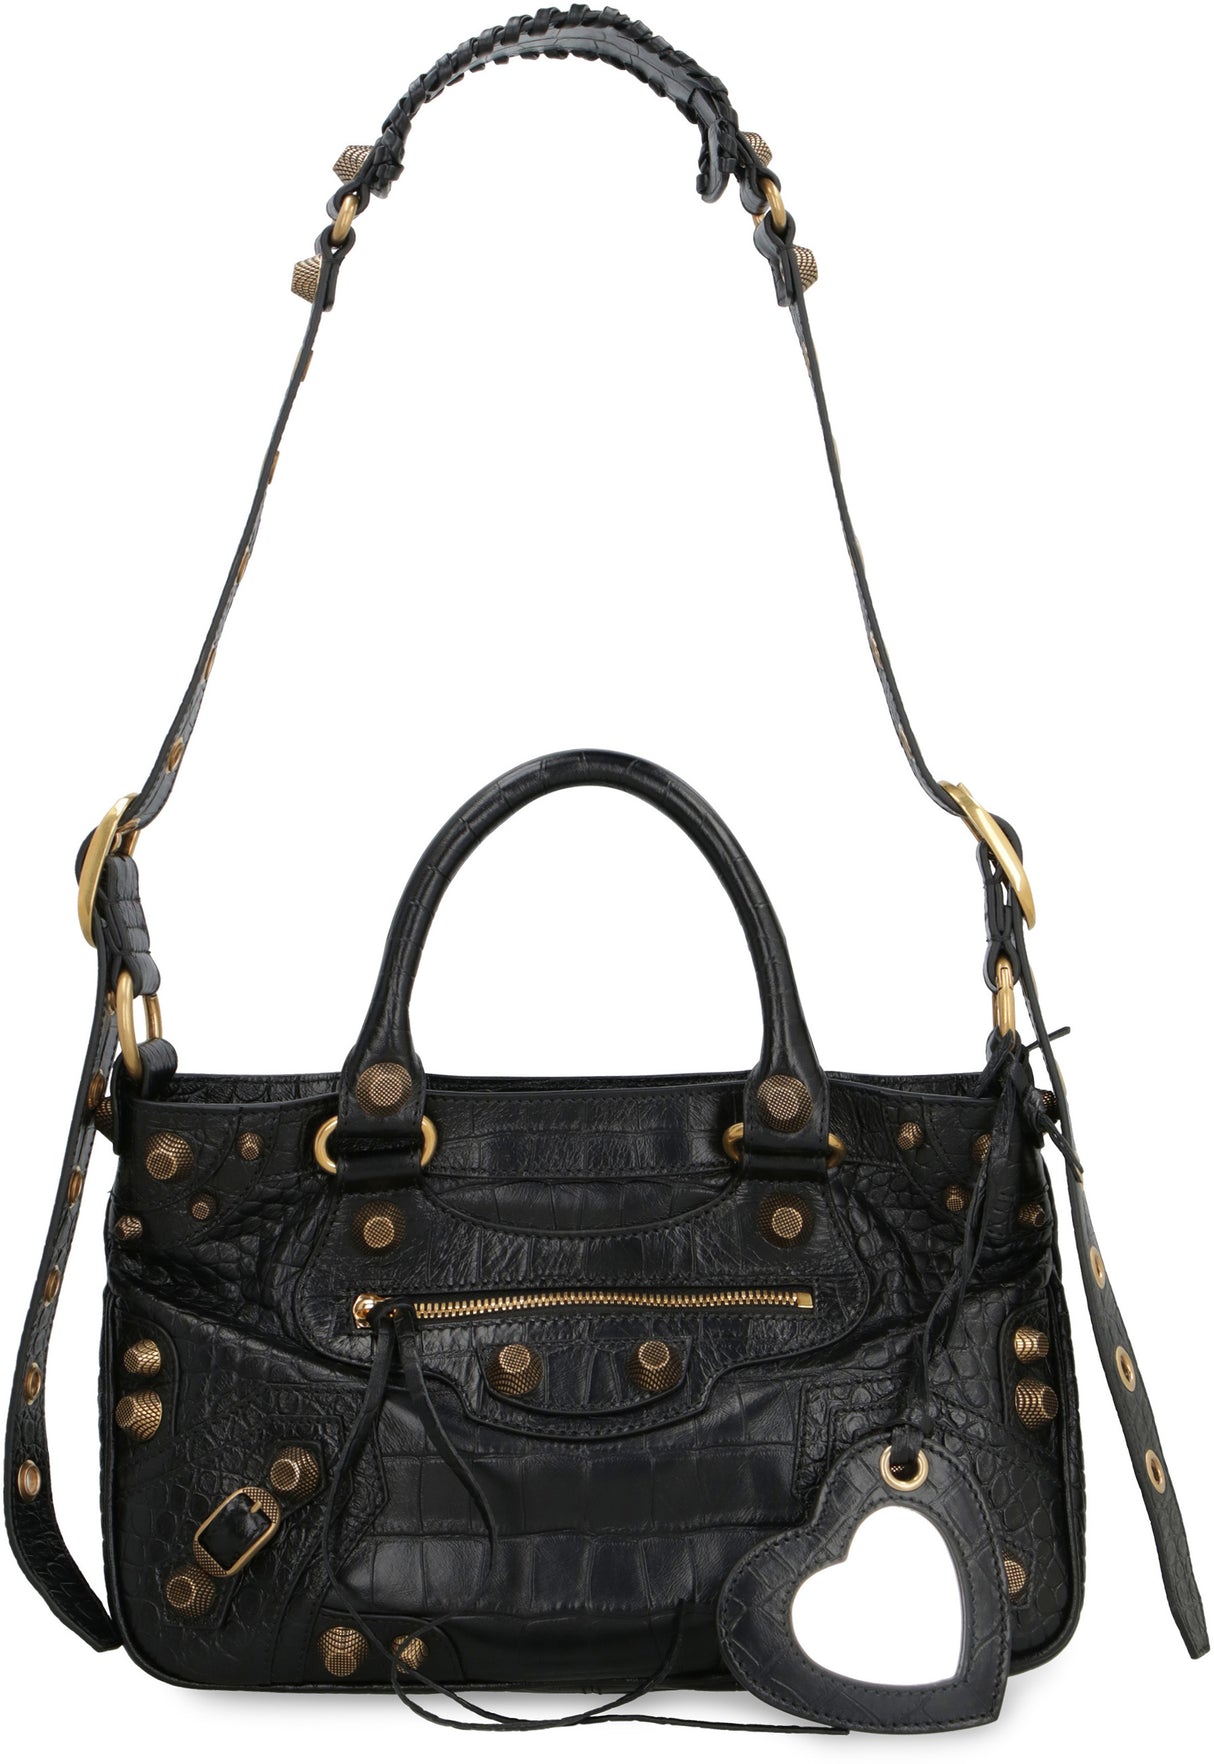 BALENCIAGA Chic Black Leather Medium Tote with Decorative Studs and Buckles, Zippered Compartments & Adjustable Strap